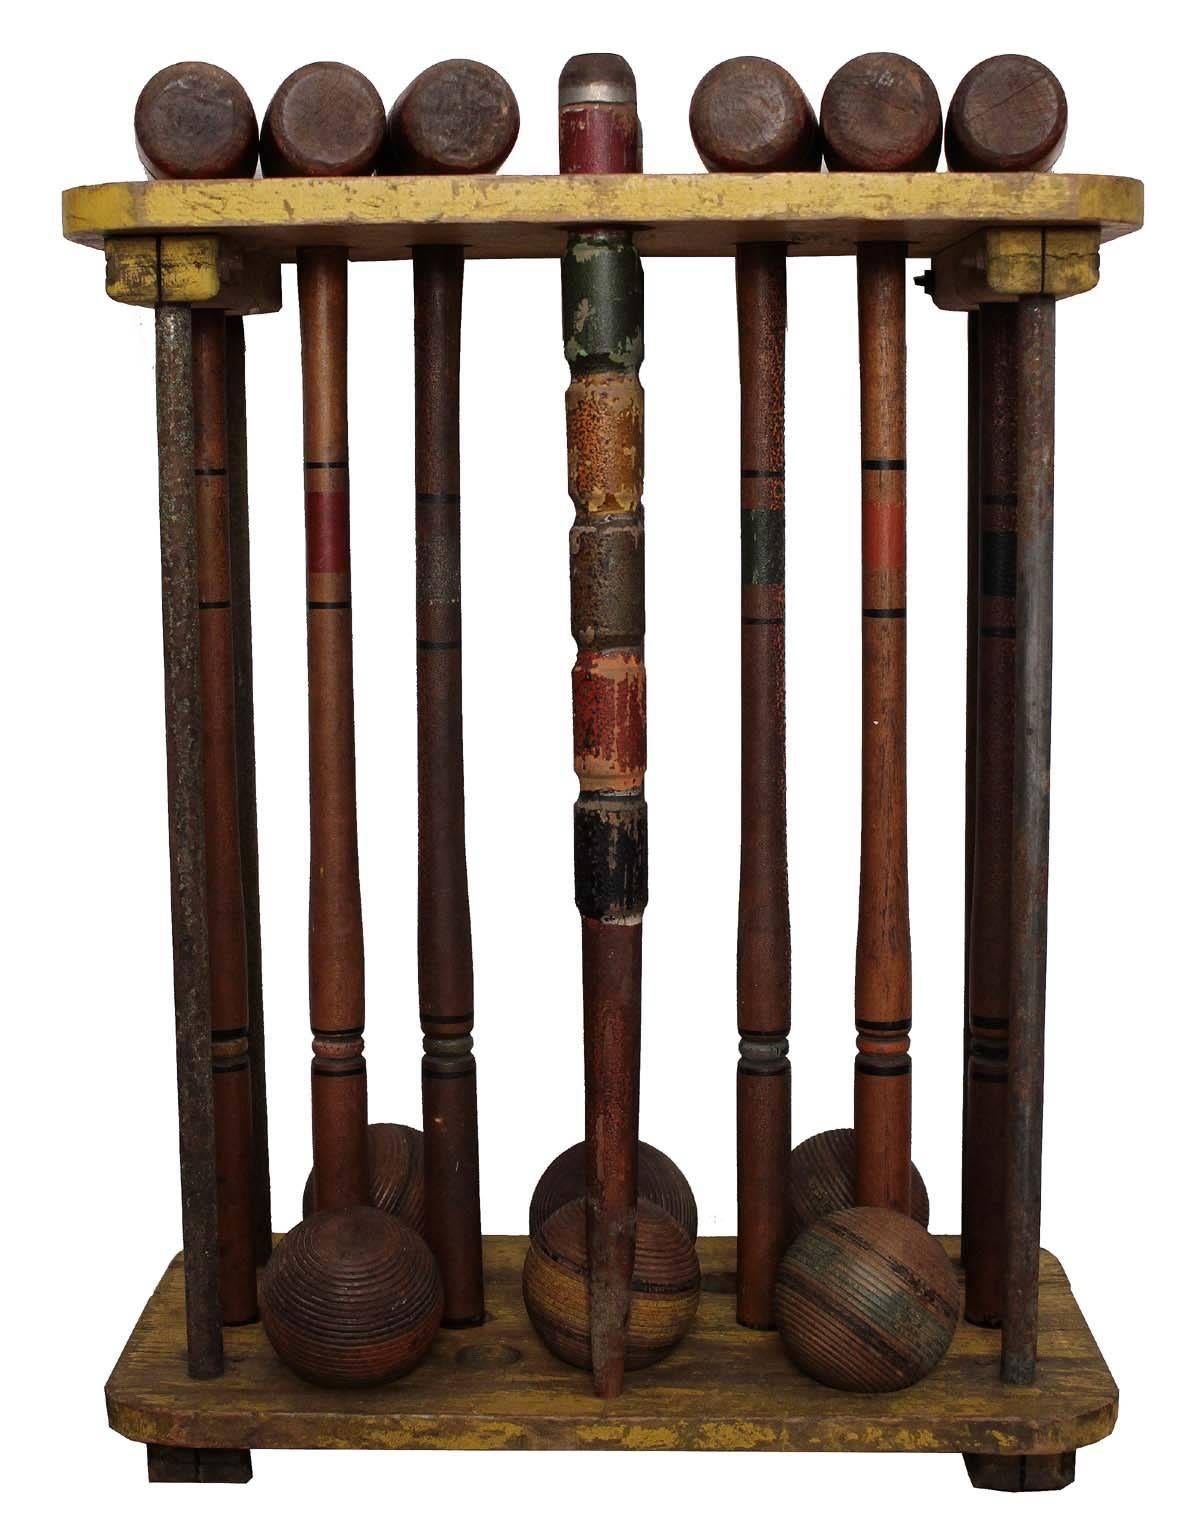 A complete antique croquet set. This set has wonderful color and is in great condition. The uprights on the Stand are metal all other components are wood. Mallets are in working order and original.